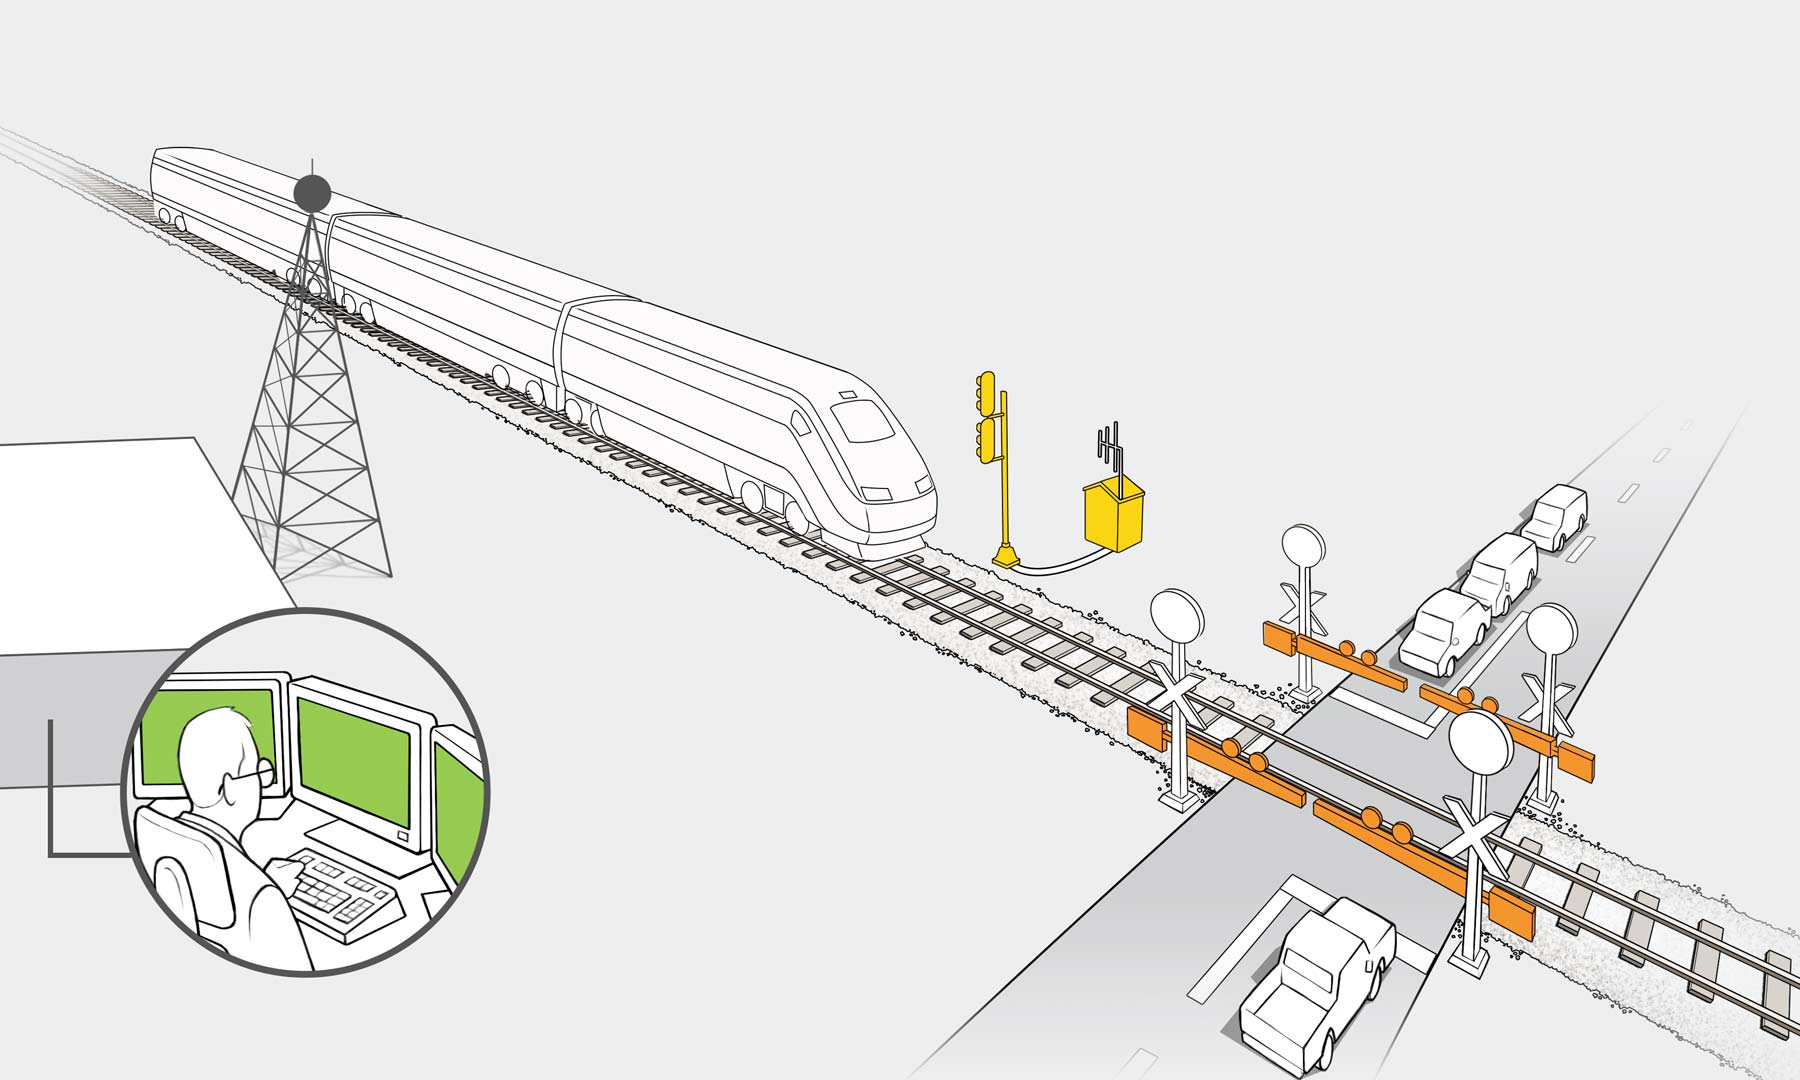 Illustration with a high-speed train crossing diagonally through the scene, a satellite, radar, and tower are communicating with the train; vehicles are parked at gates which are blocking the track as the train passes; an operator is monitoring conditions from computers.